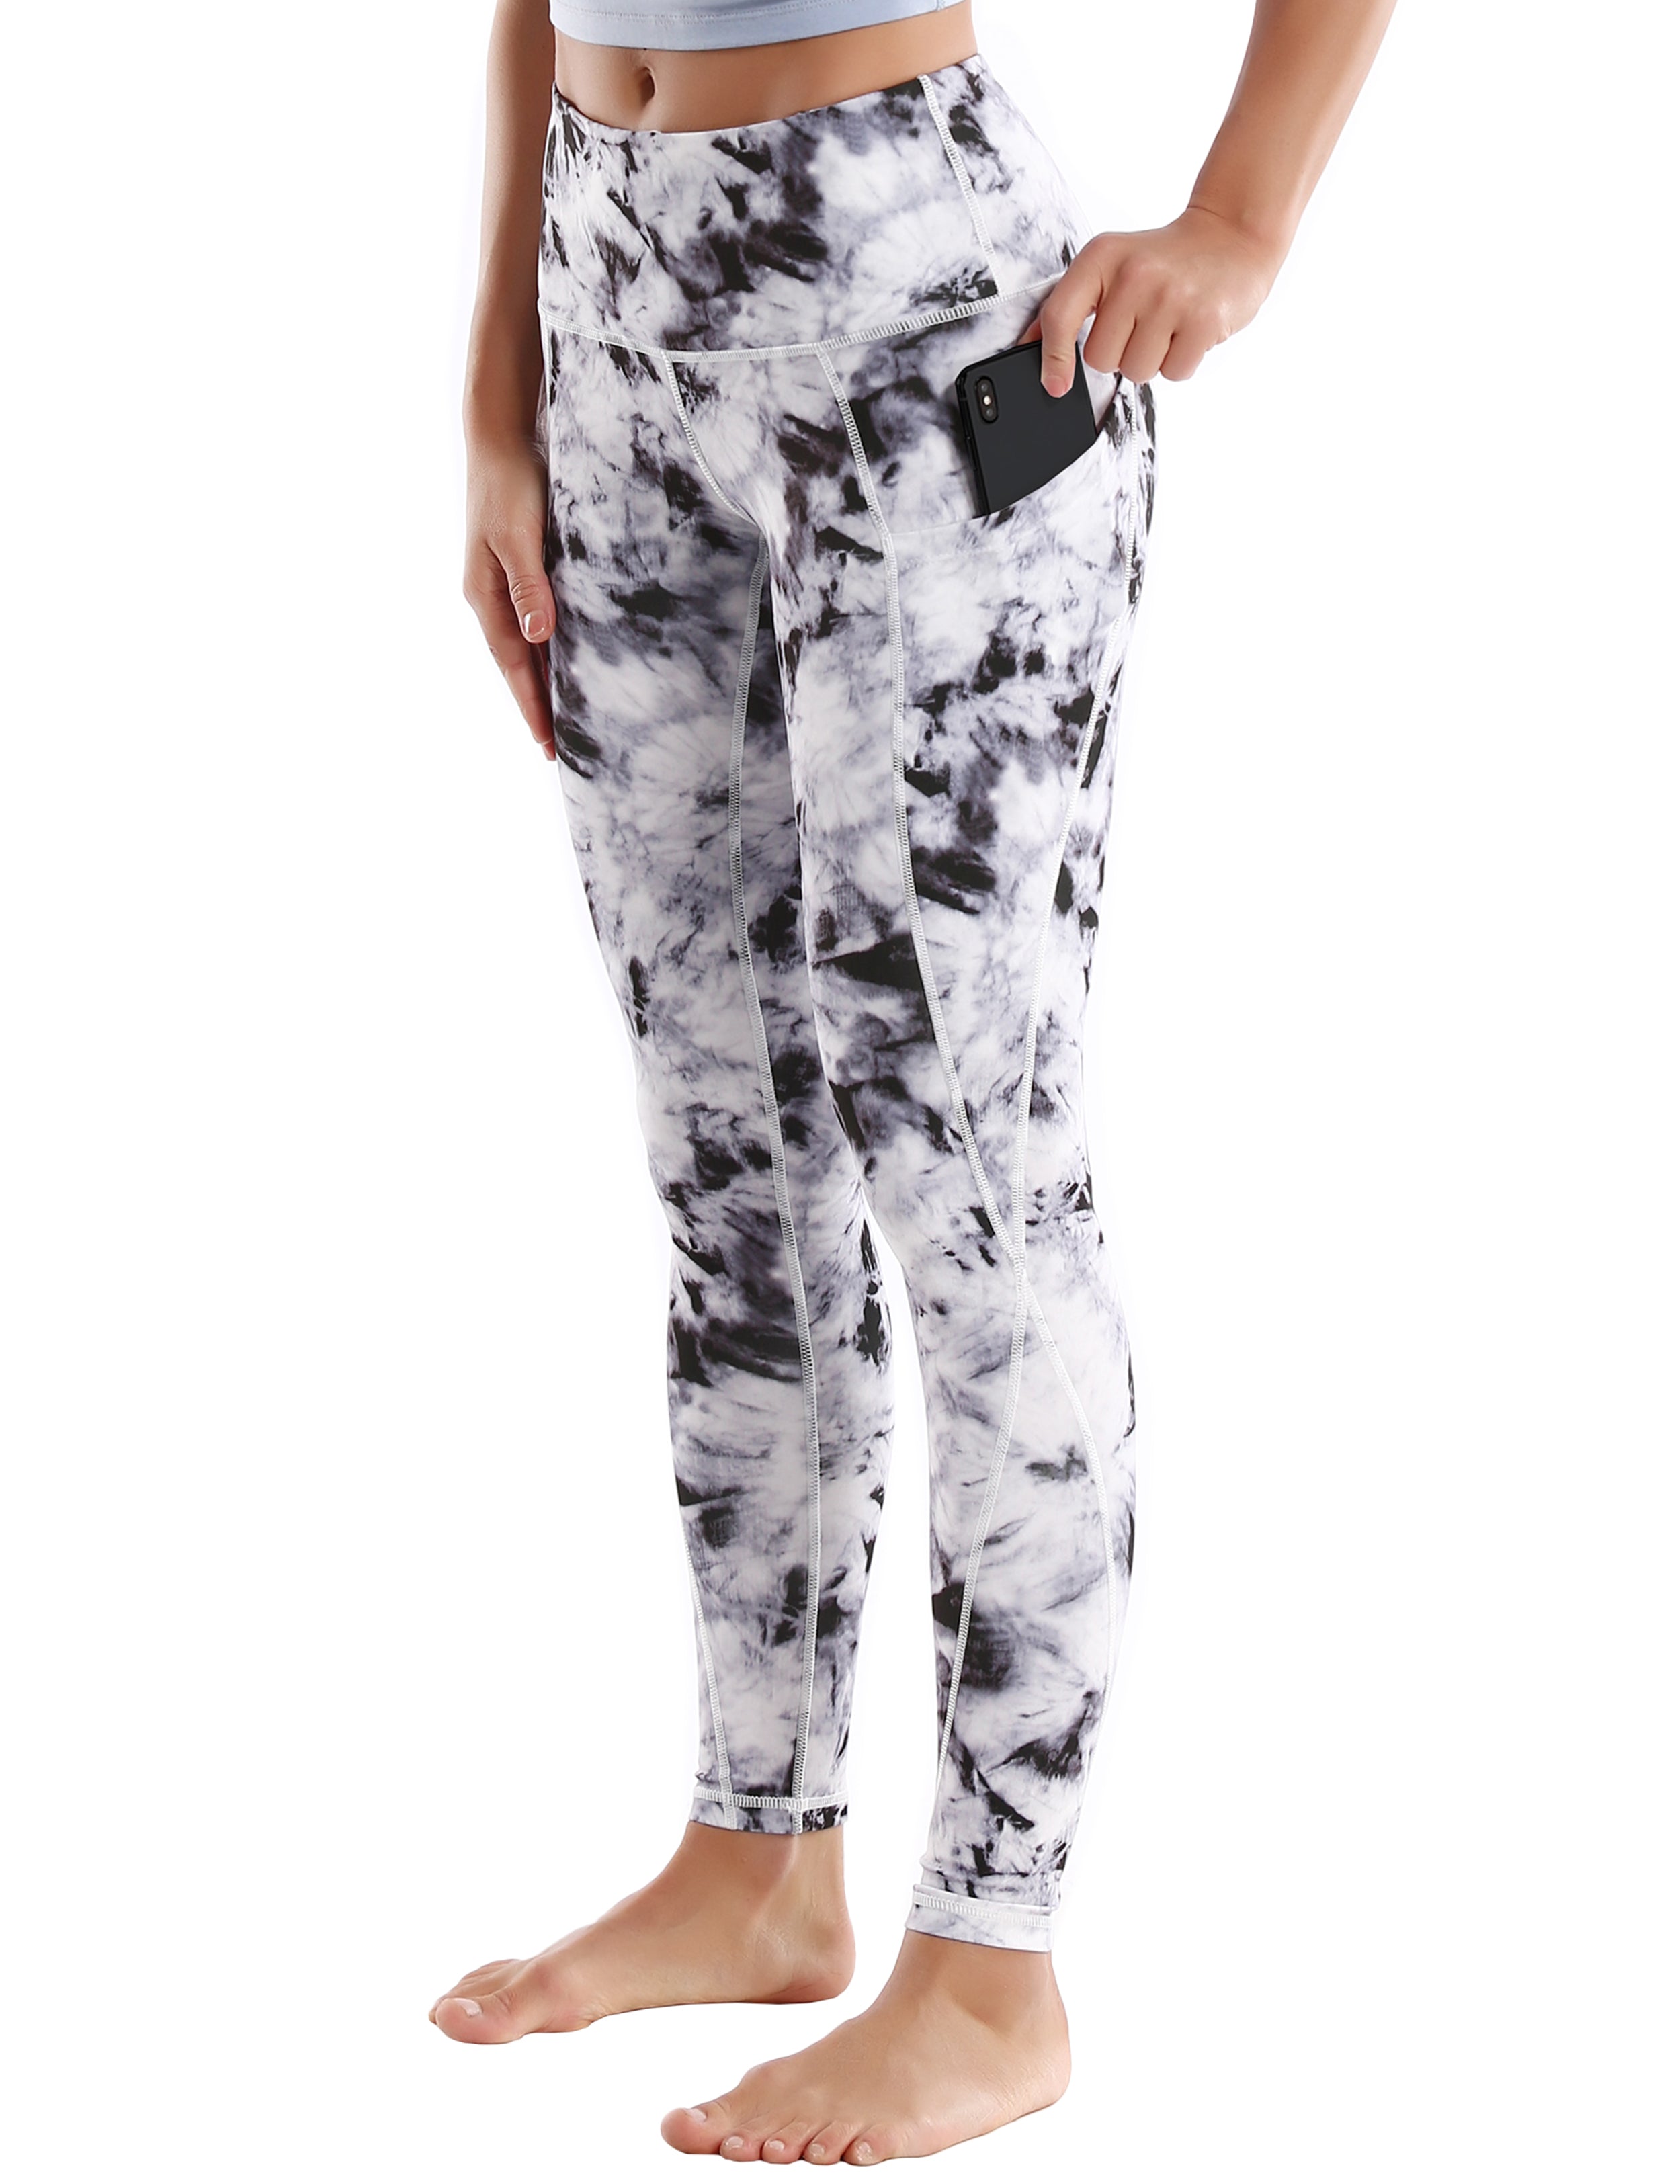 High Waist Side Pockets Pilates Pants blackdandelion 78%Polyester/22%Spandex Fabric doesn't attract lint easily 4-way stretch No see-through Moisture-wicking Tummy control Inner pocket